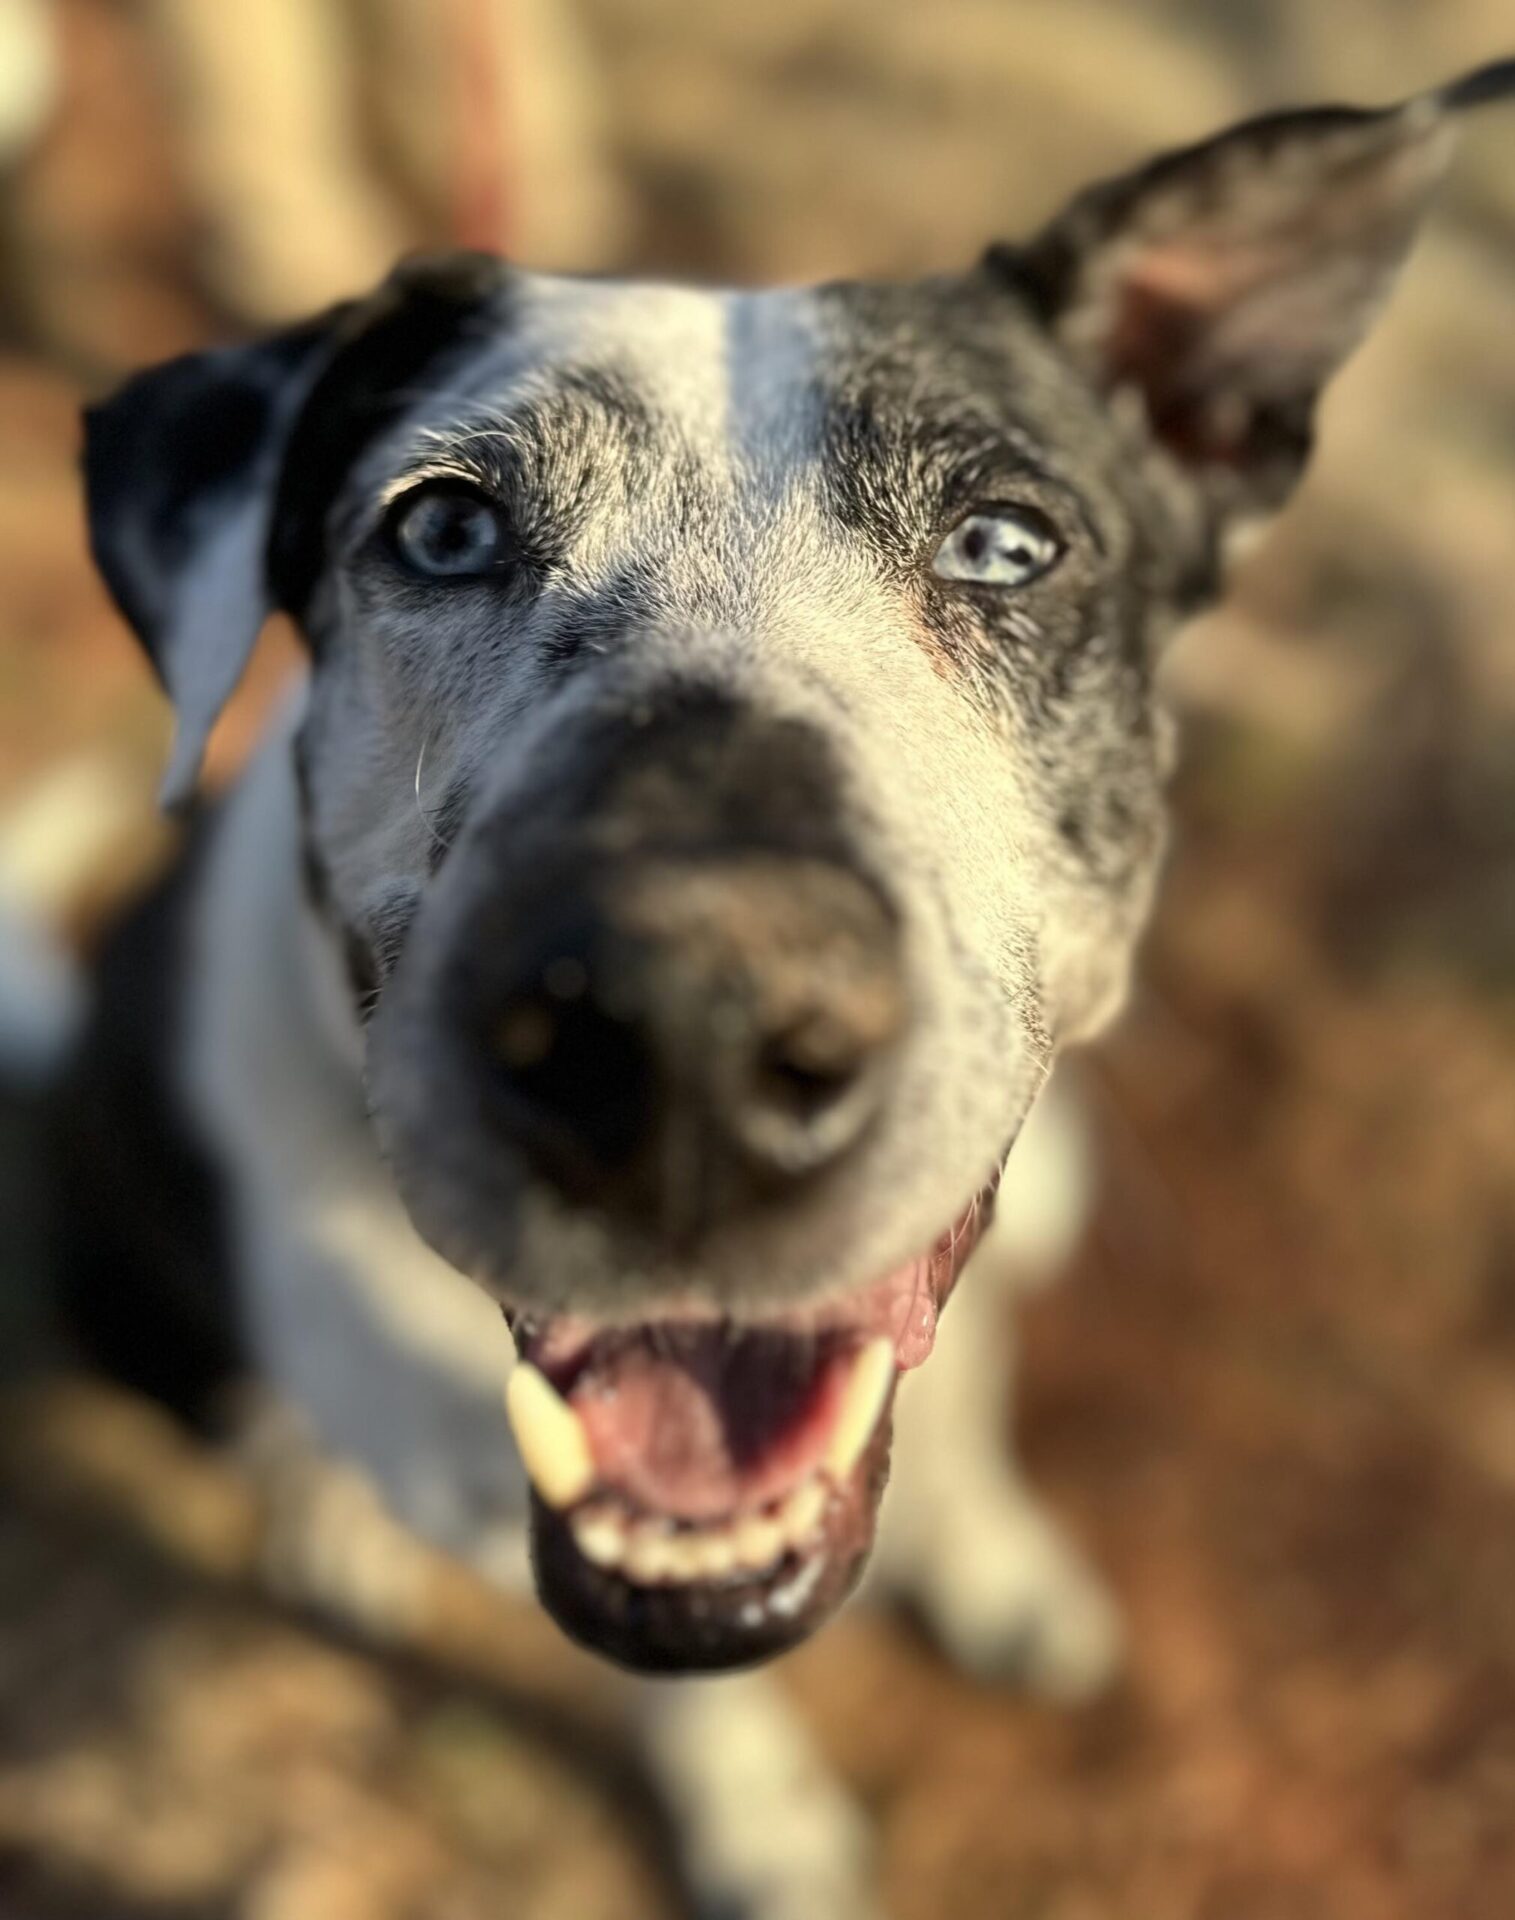 special needs dog blue seeks guide-person